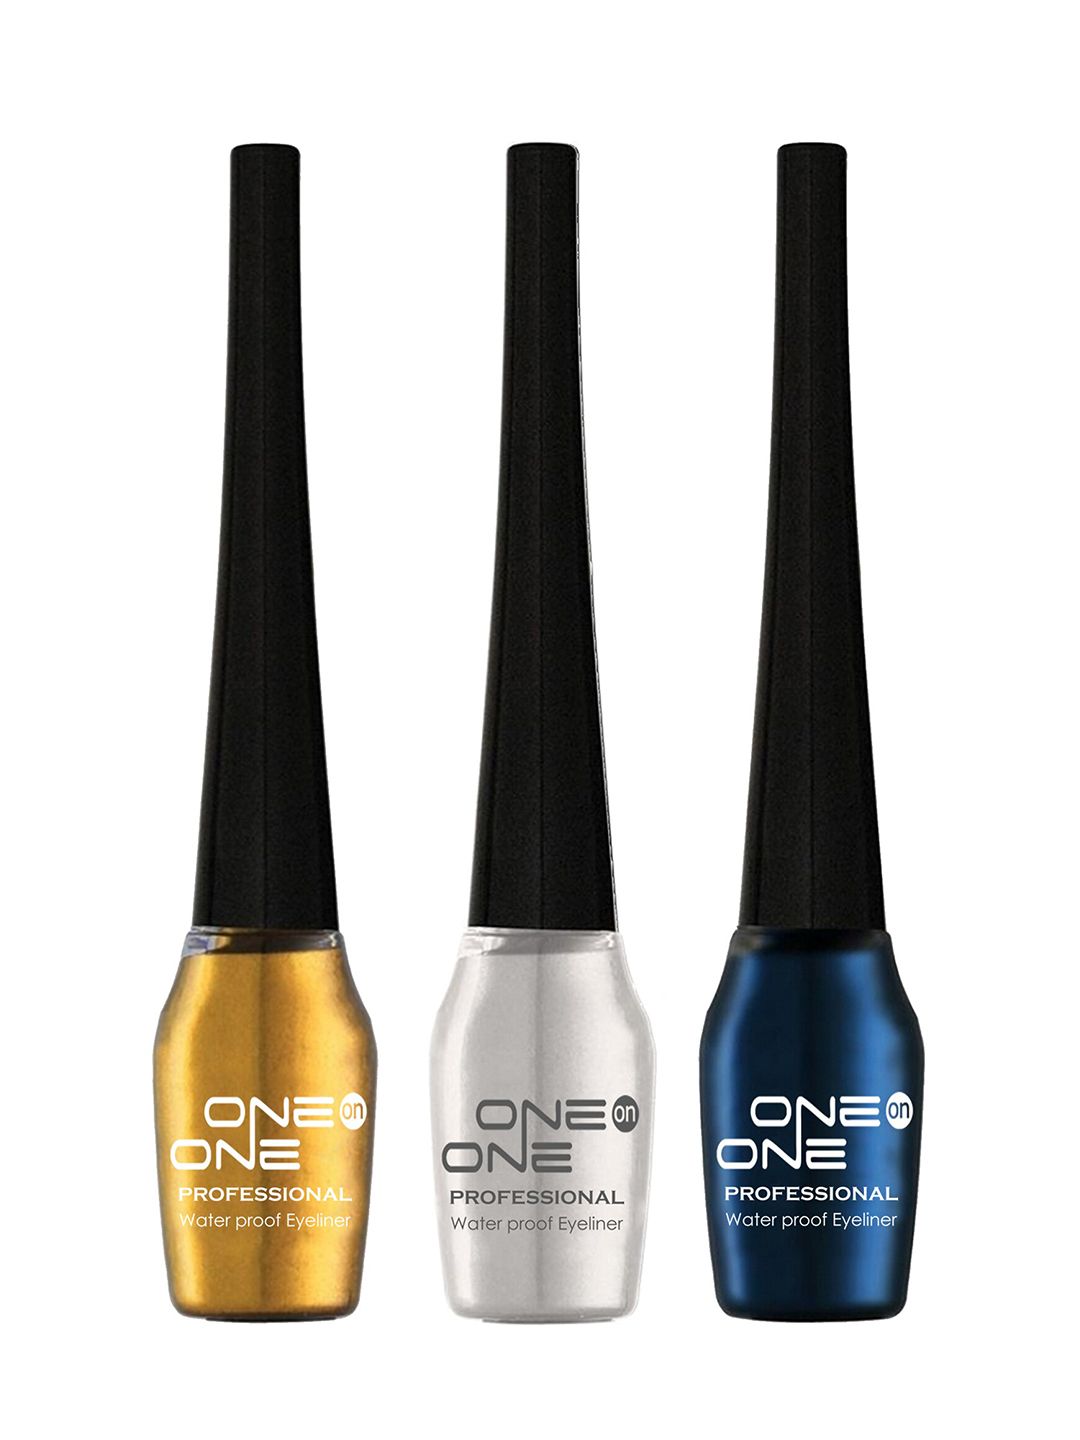 ONE on ONE Set of 3 Professional Waterproof Liquid Eyeliners Price in India